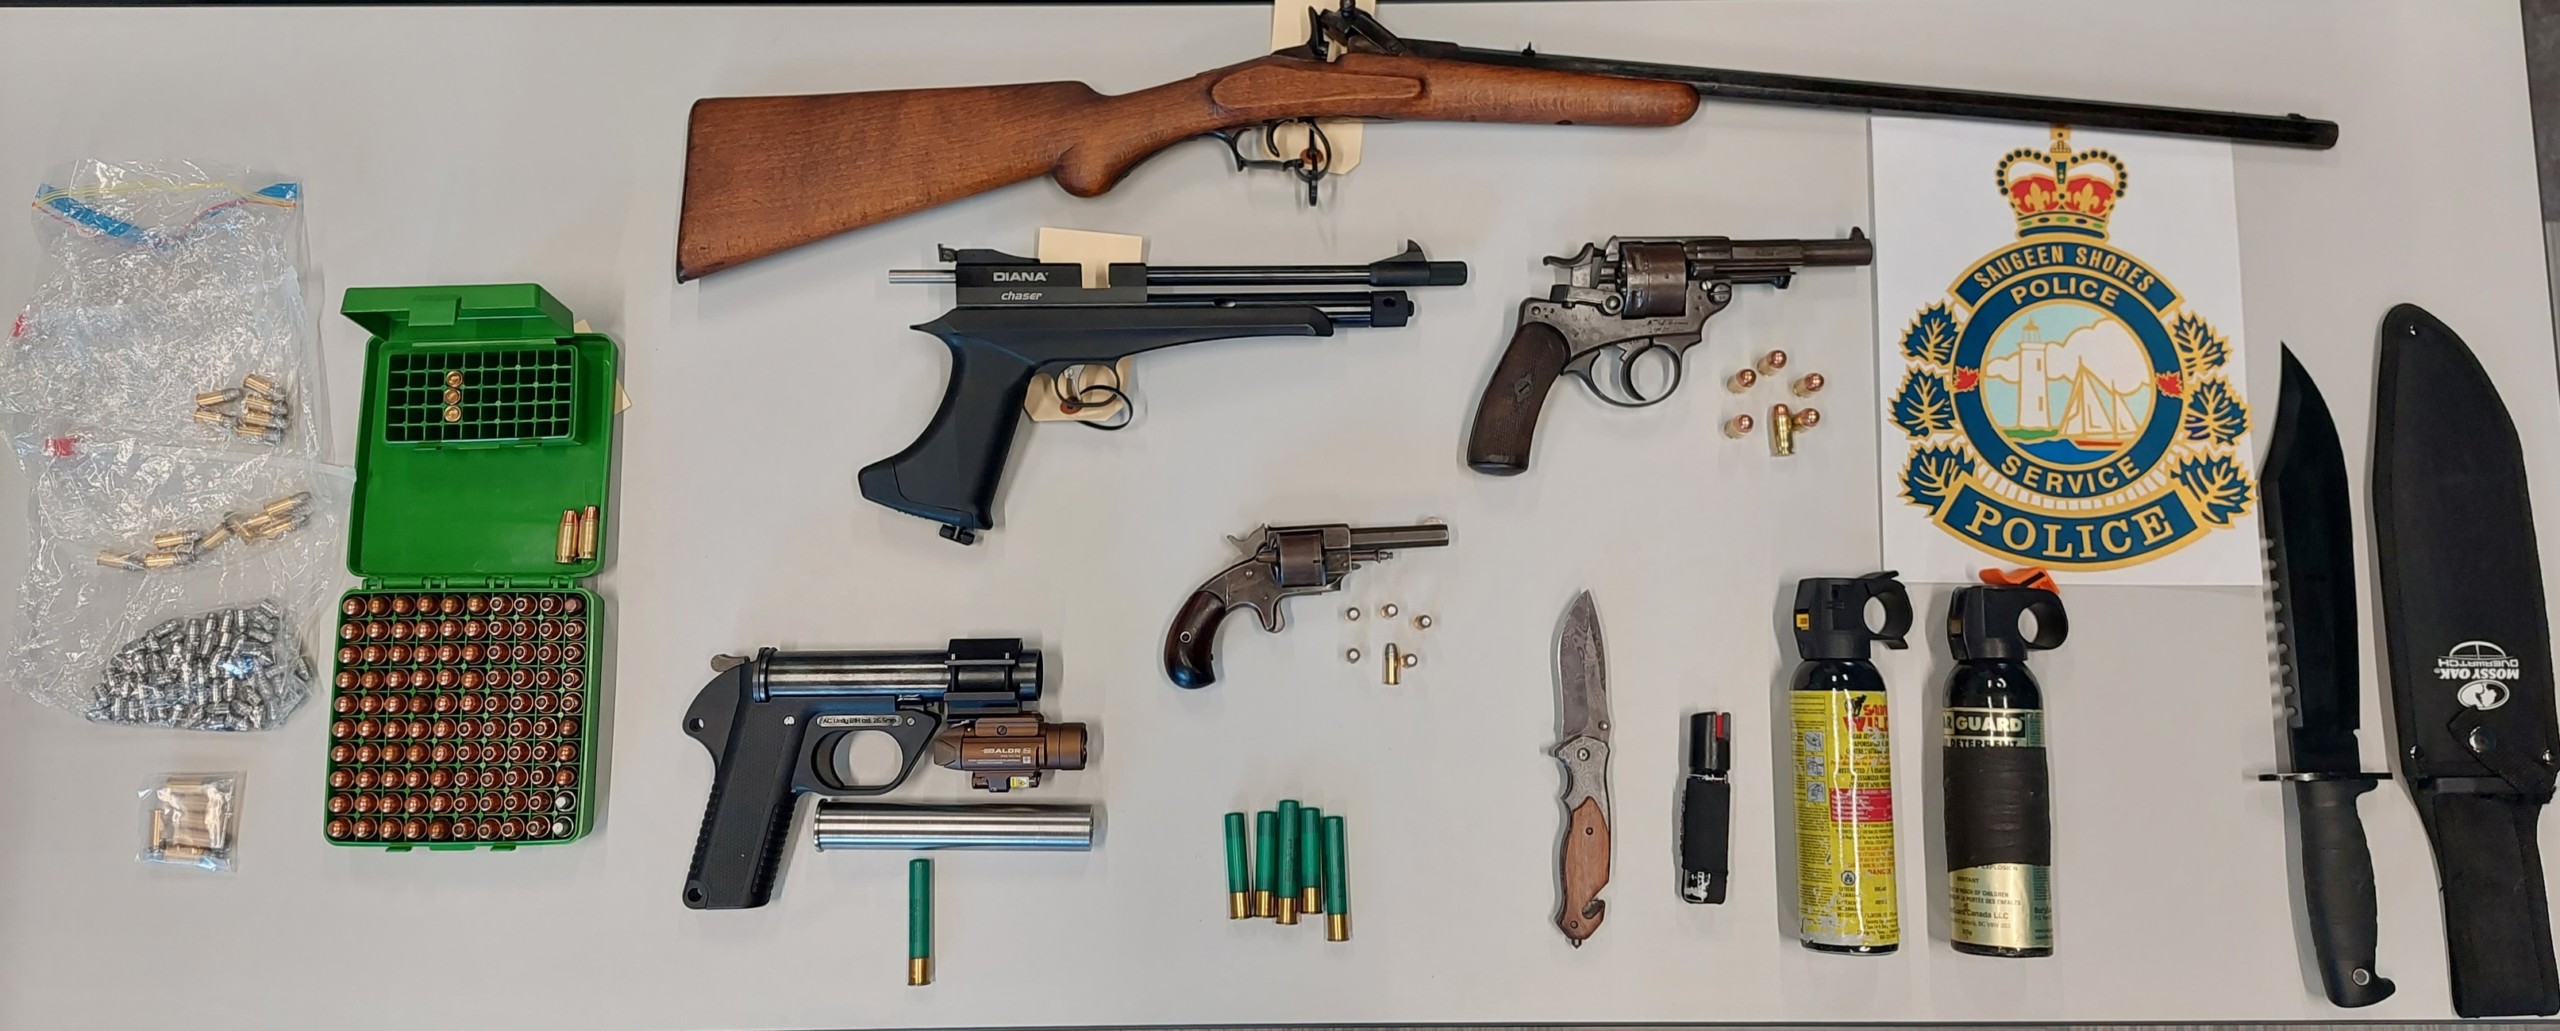 Weapons recovered by Saugeen Shores Police